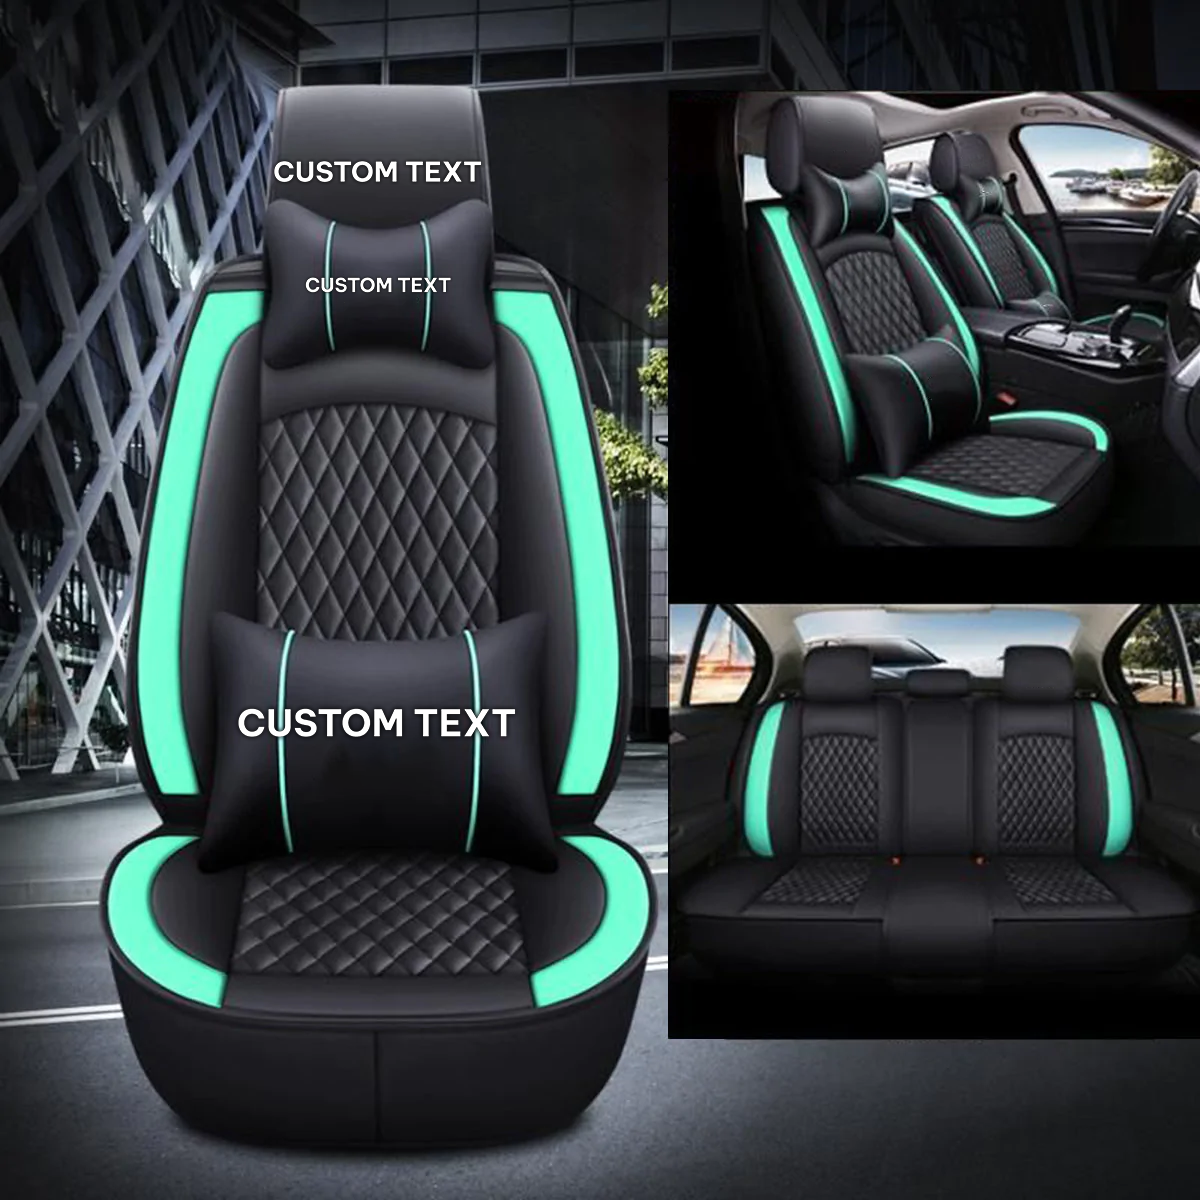 Custom Text For Seat Covers 5 Seats Full Set, Custom Fit For Your Cars, Leatherette Automotive Seat Cushion Protector Universal Fit, Vehicle Auto Interior Decor FD13988